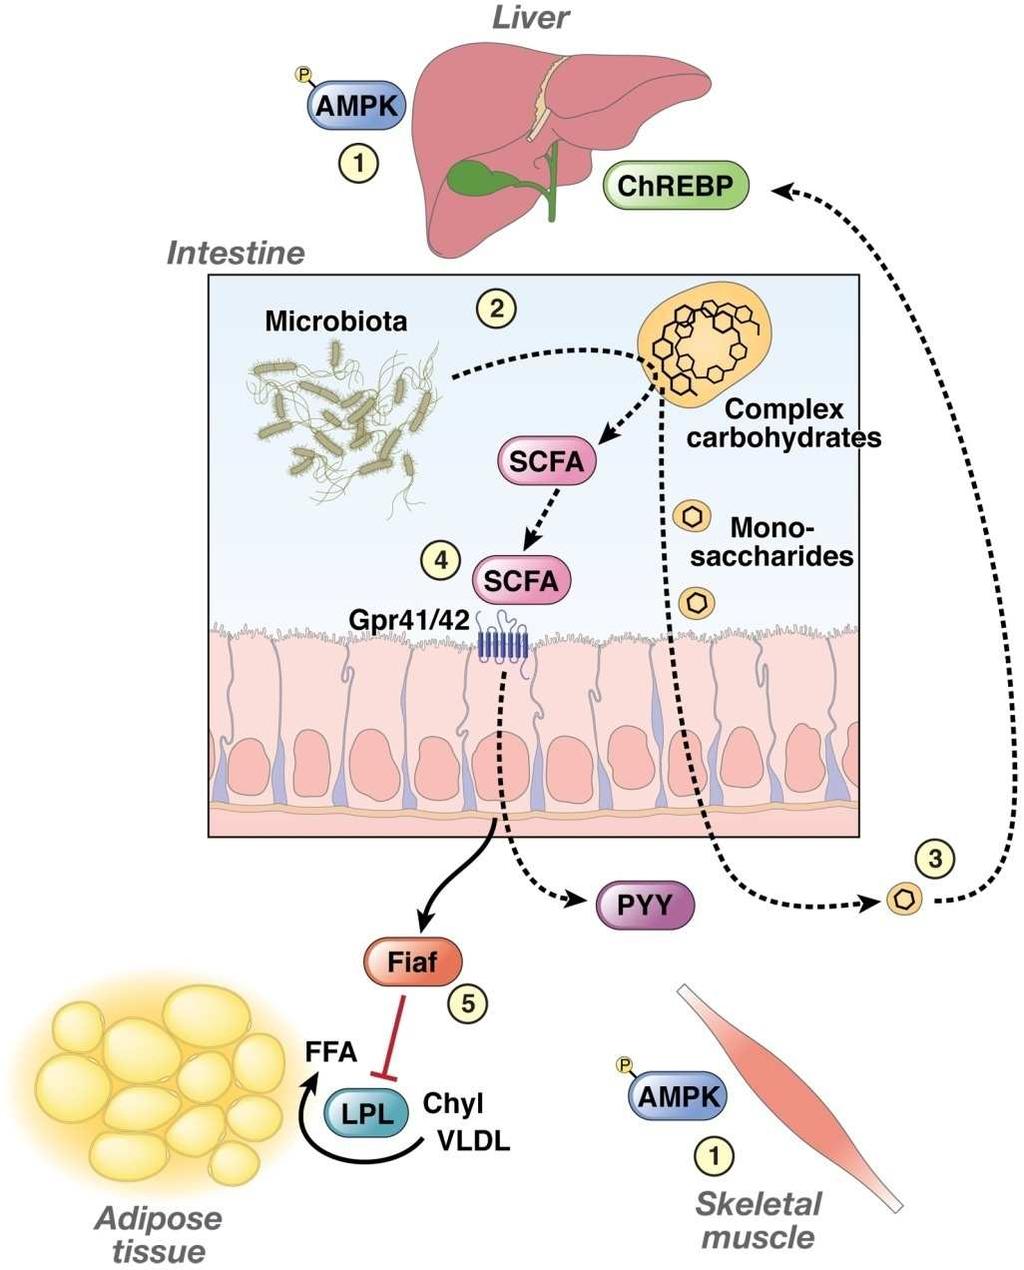 Potential interactions of the microbiota with